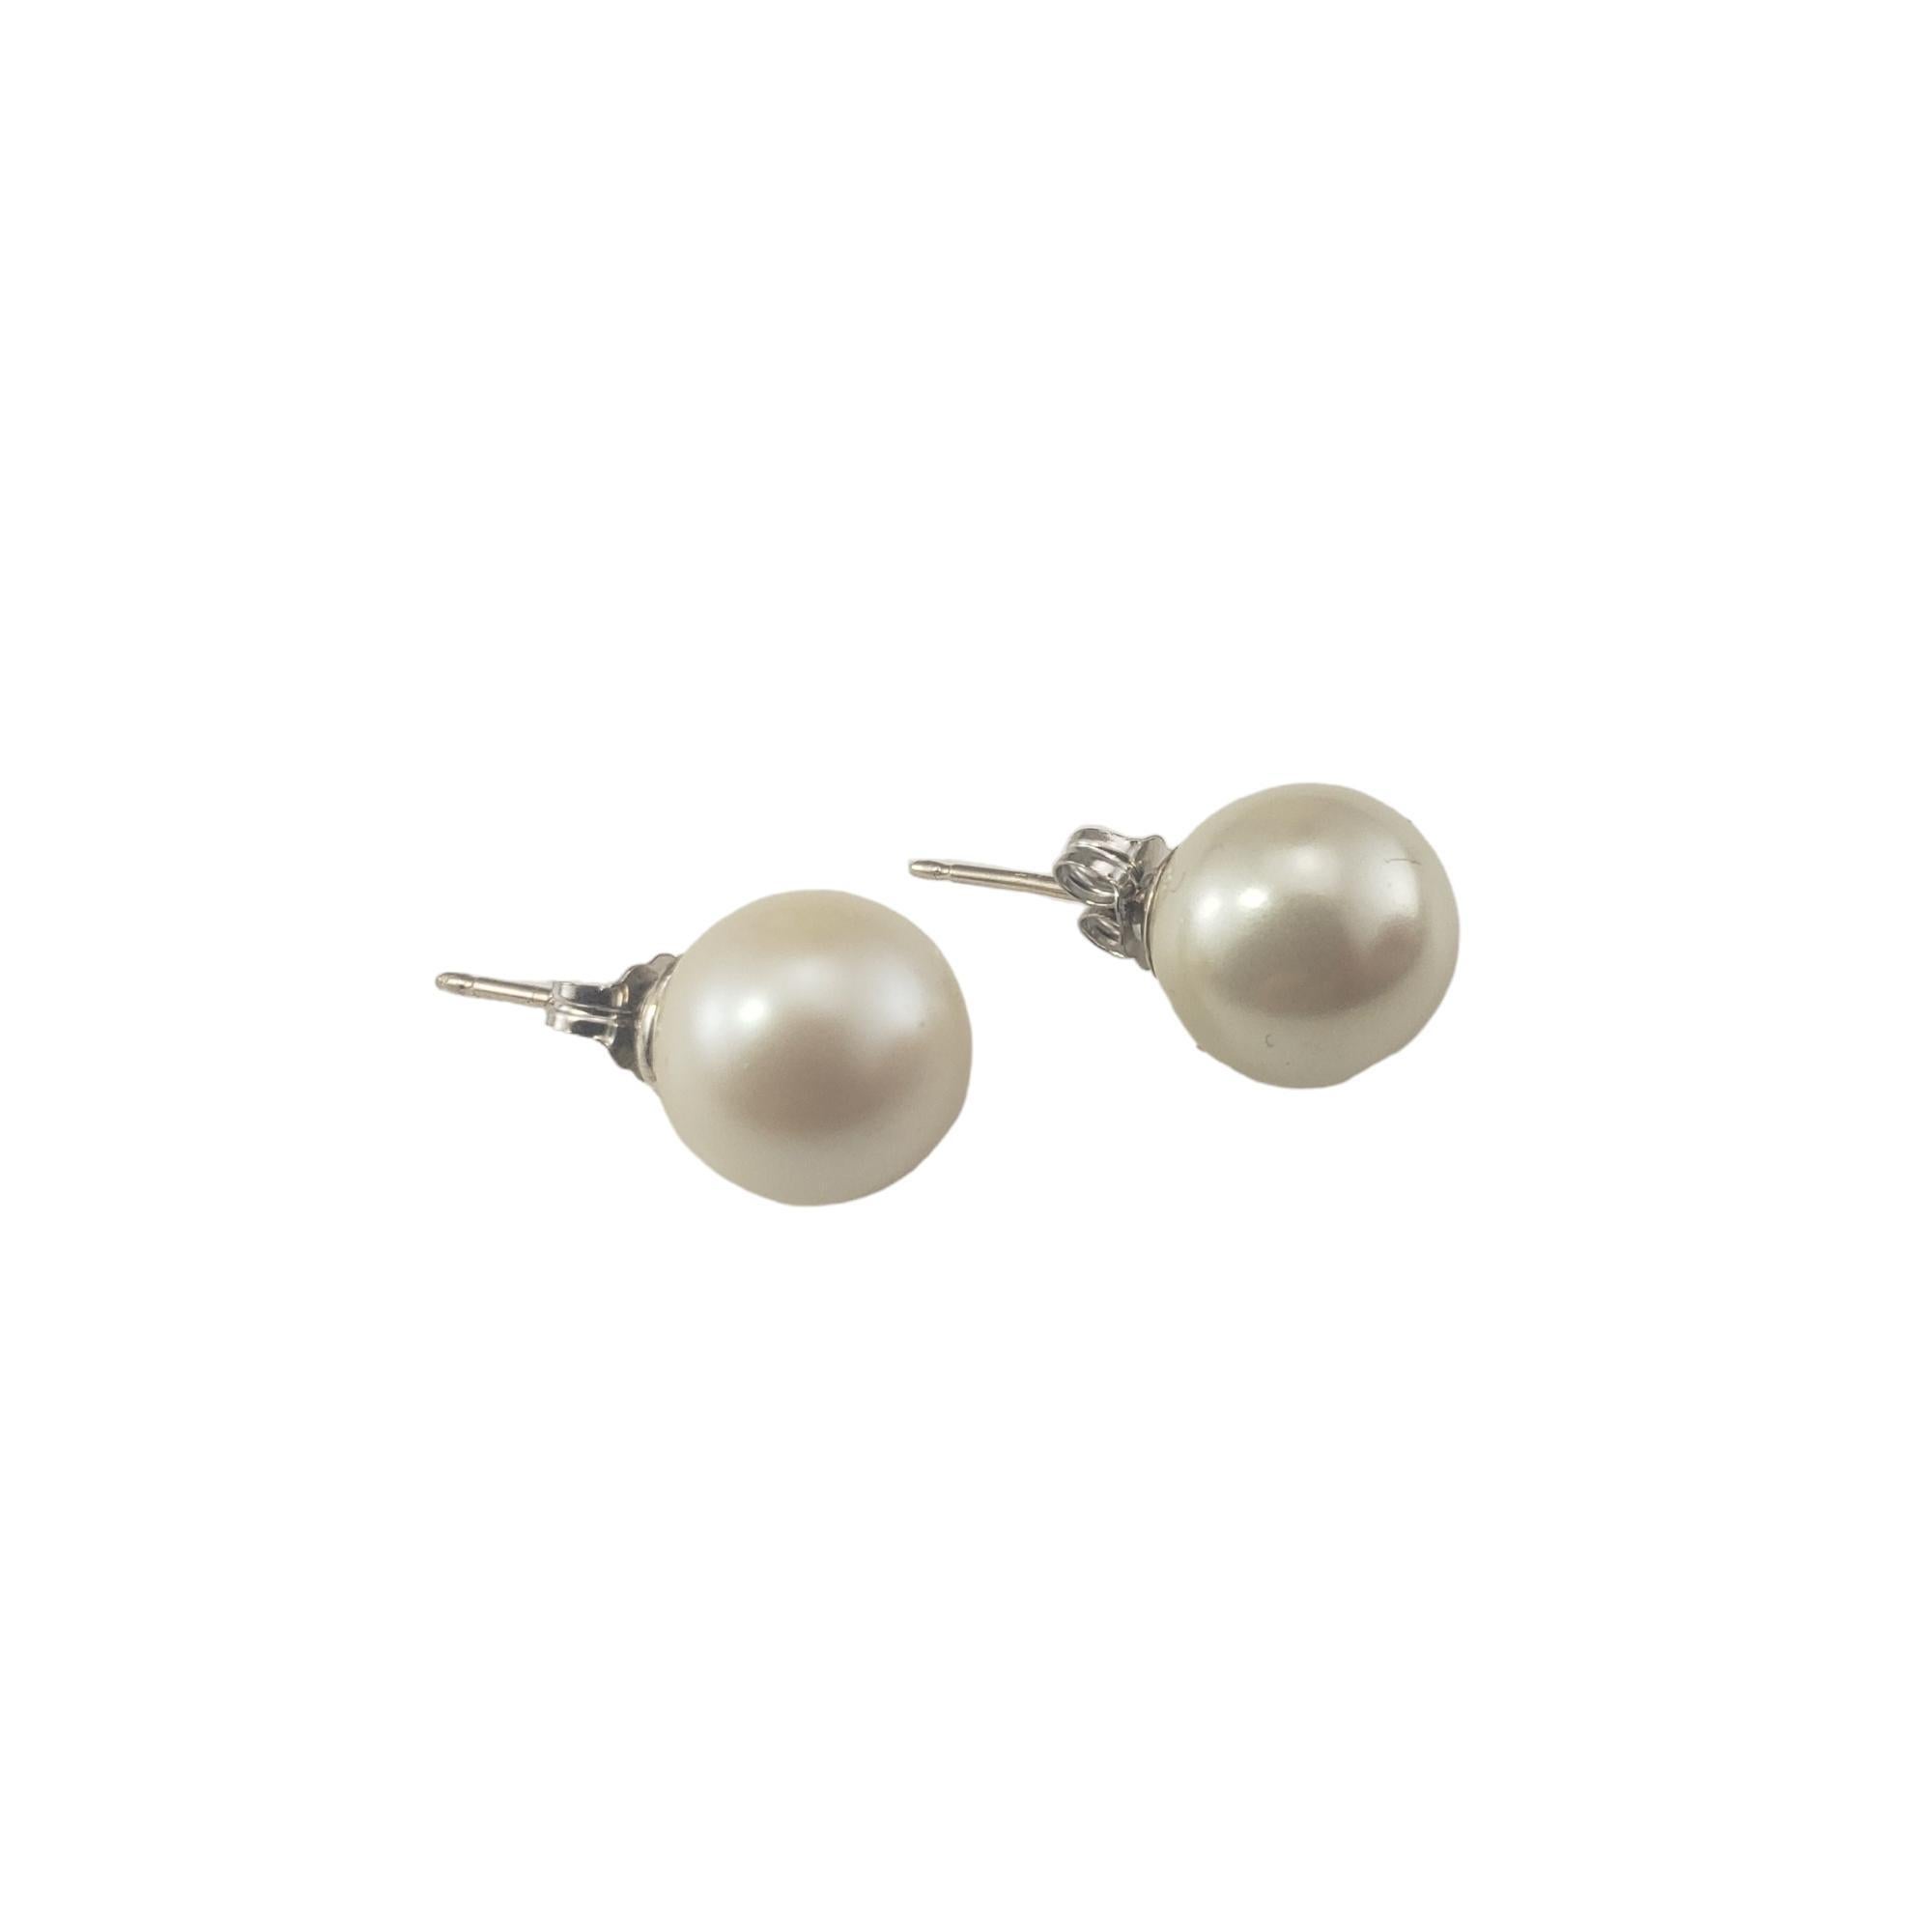 14 Karat White Gold Pearl Stud Earrings #16799 In Good Condition For Sale In Washington Depot, CT